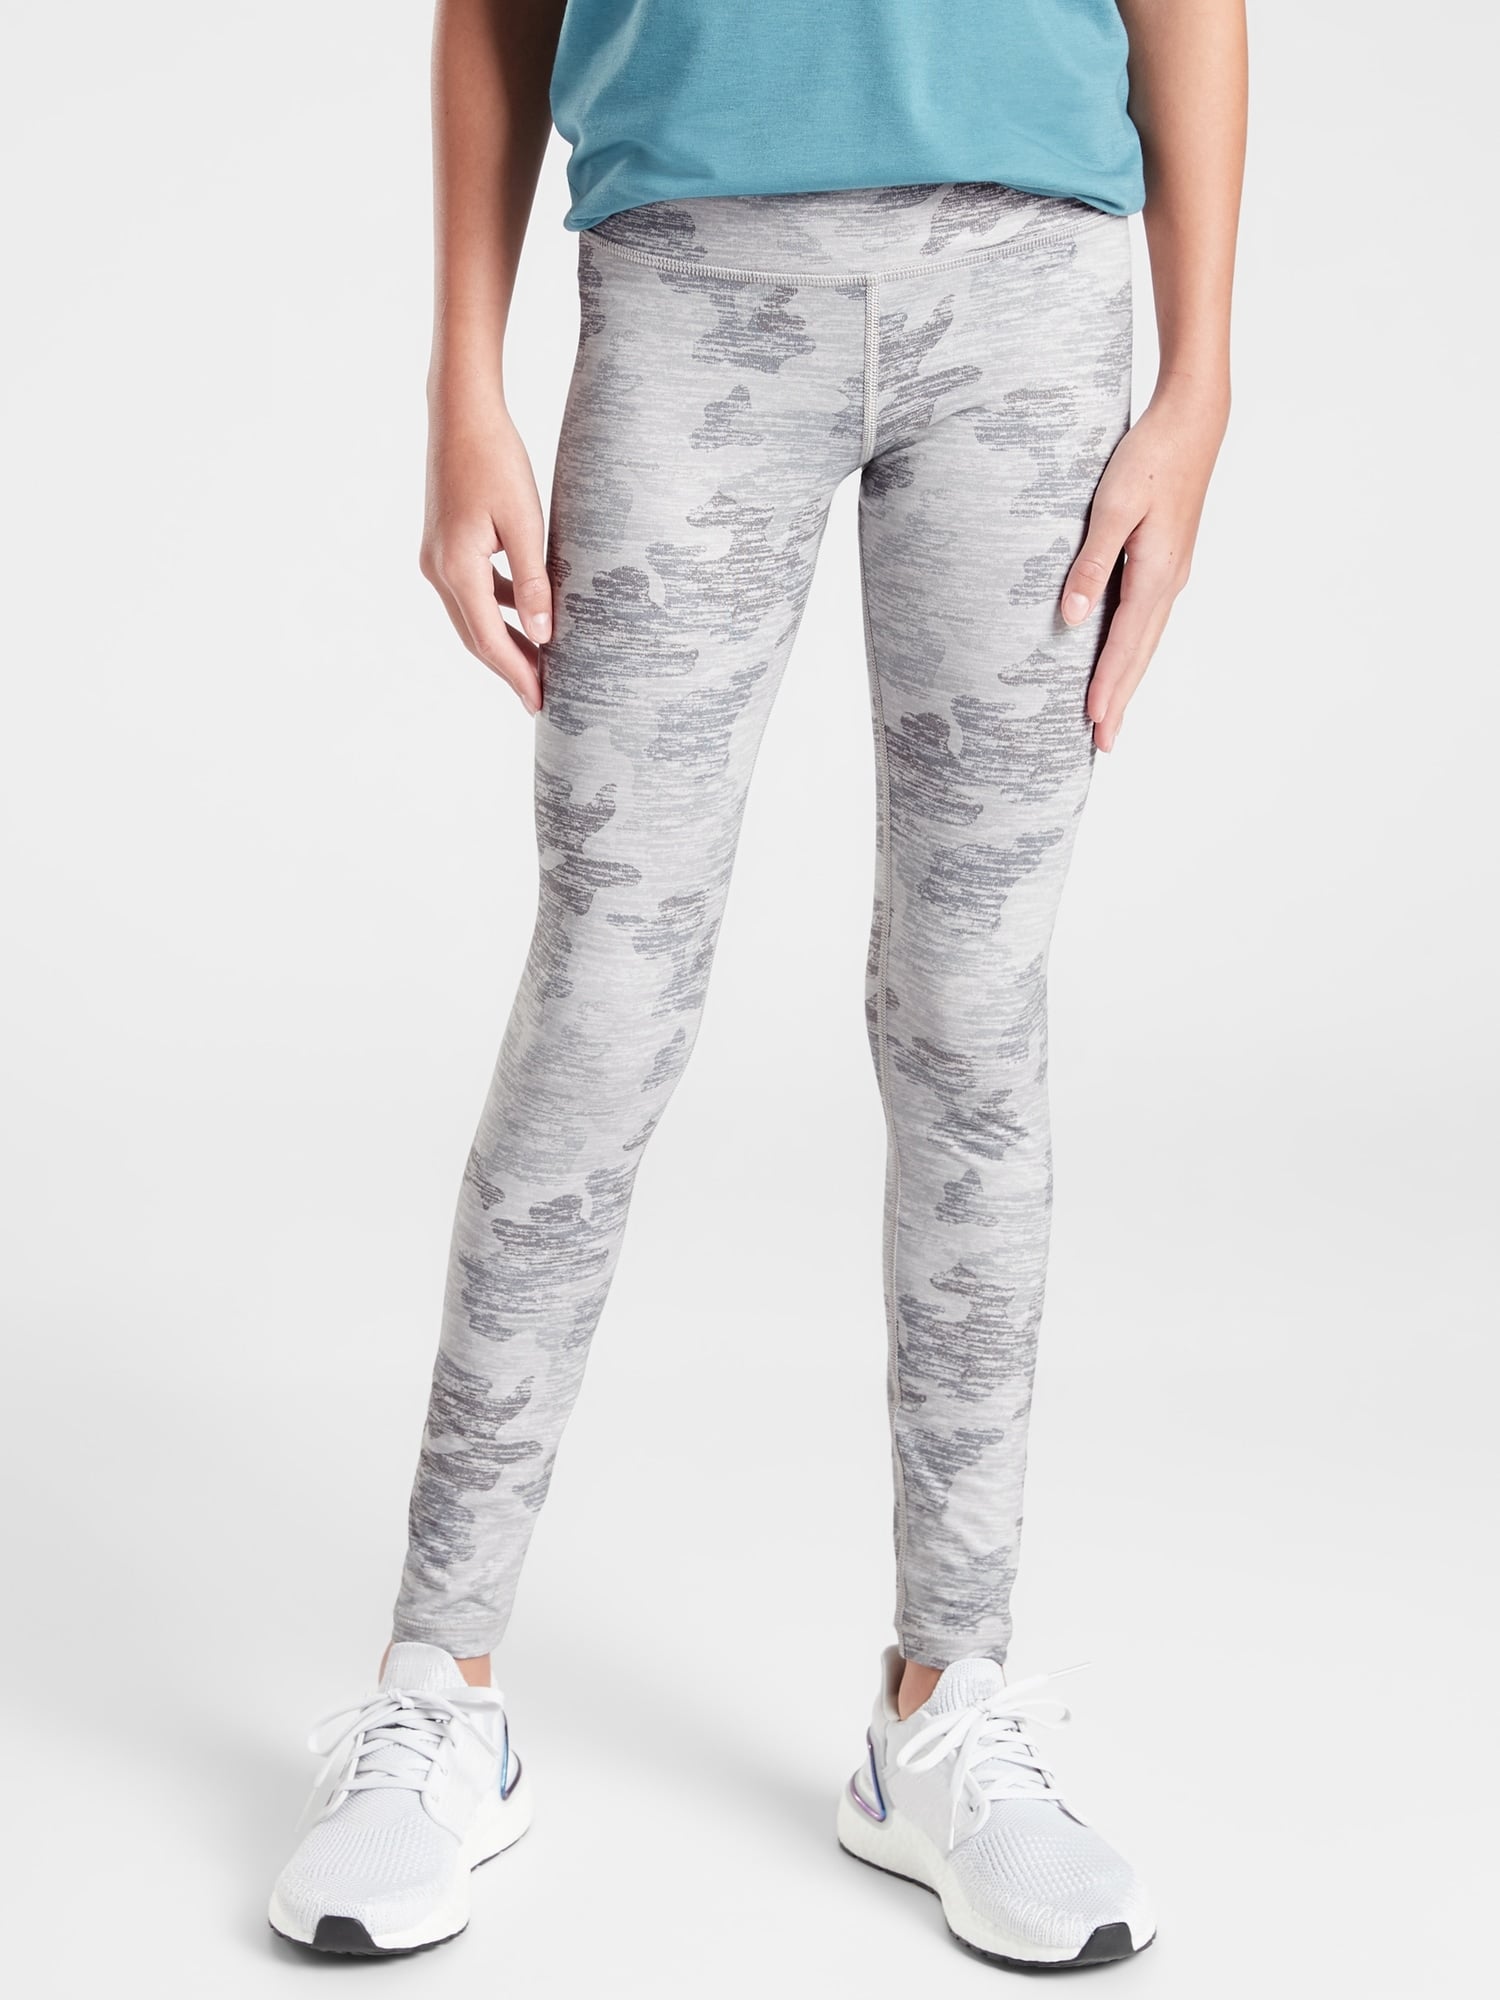 Athleta Mother-Daughter Fitness Sets